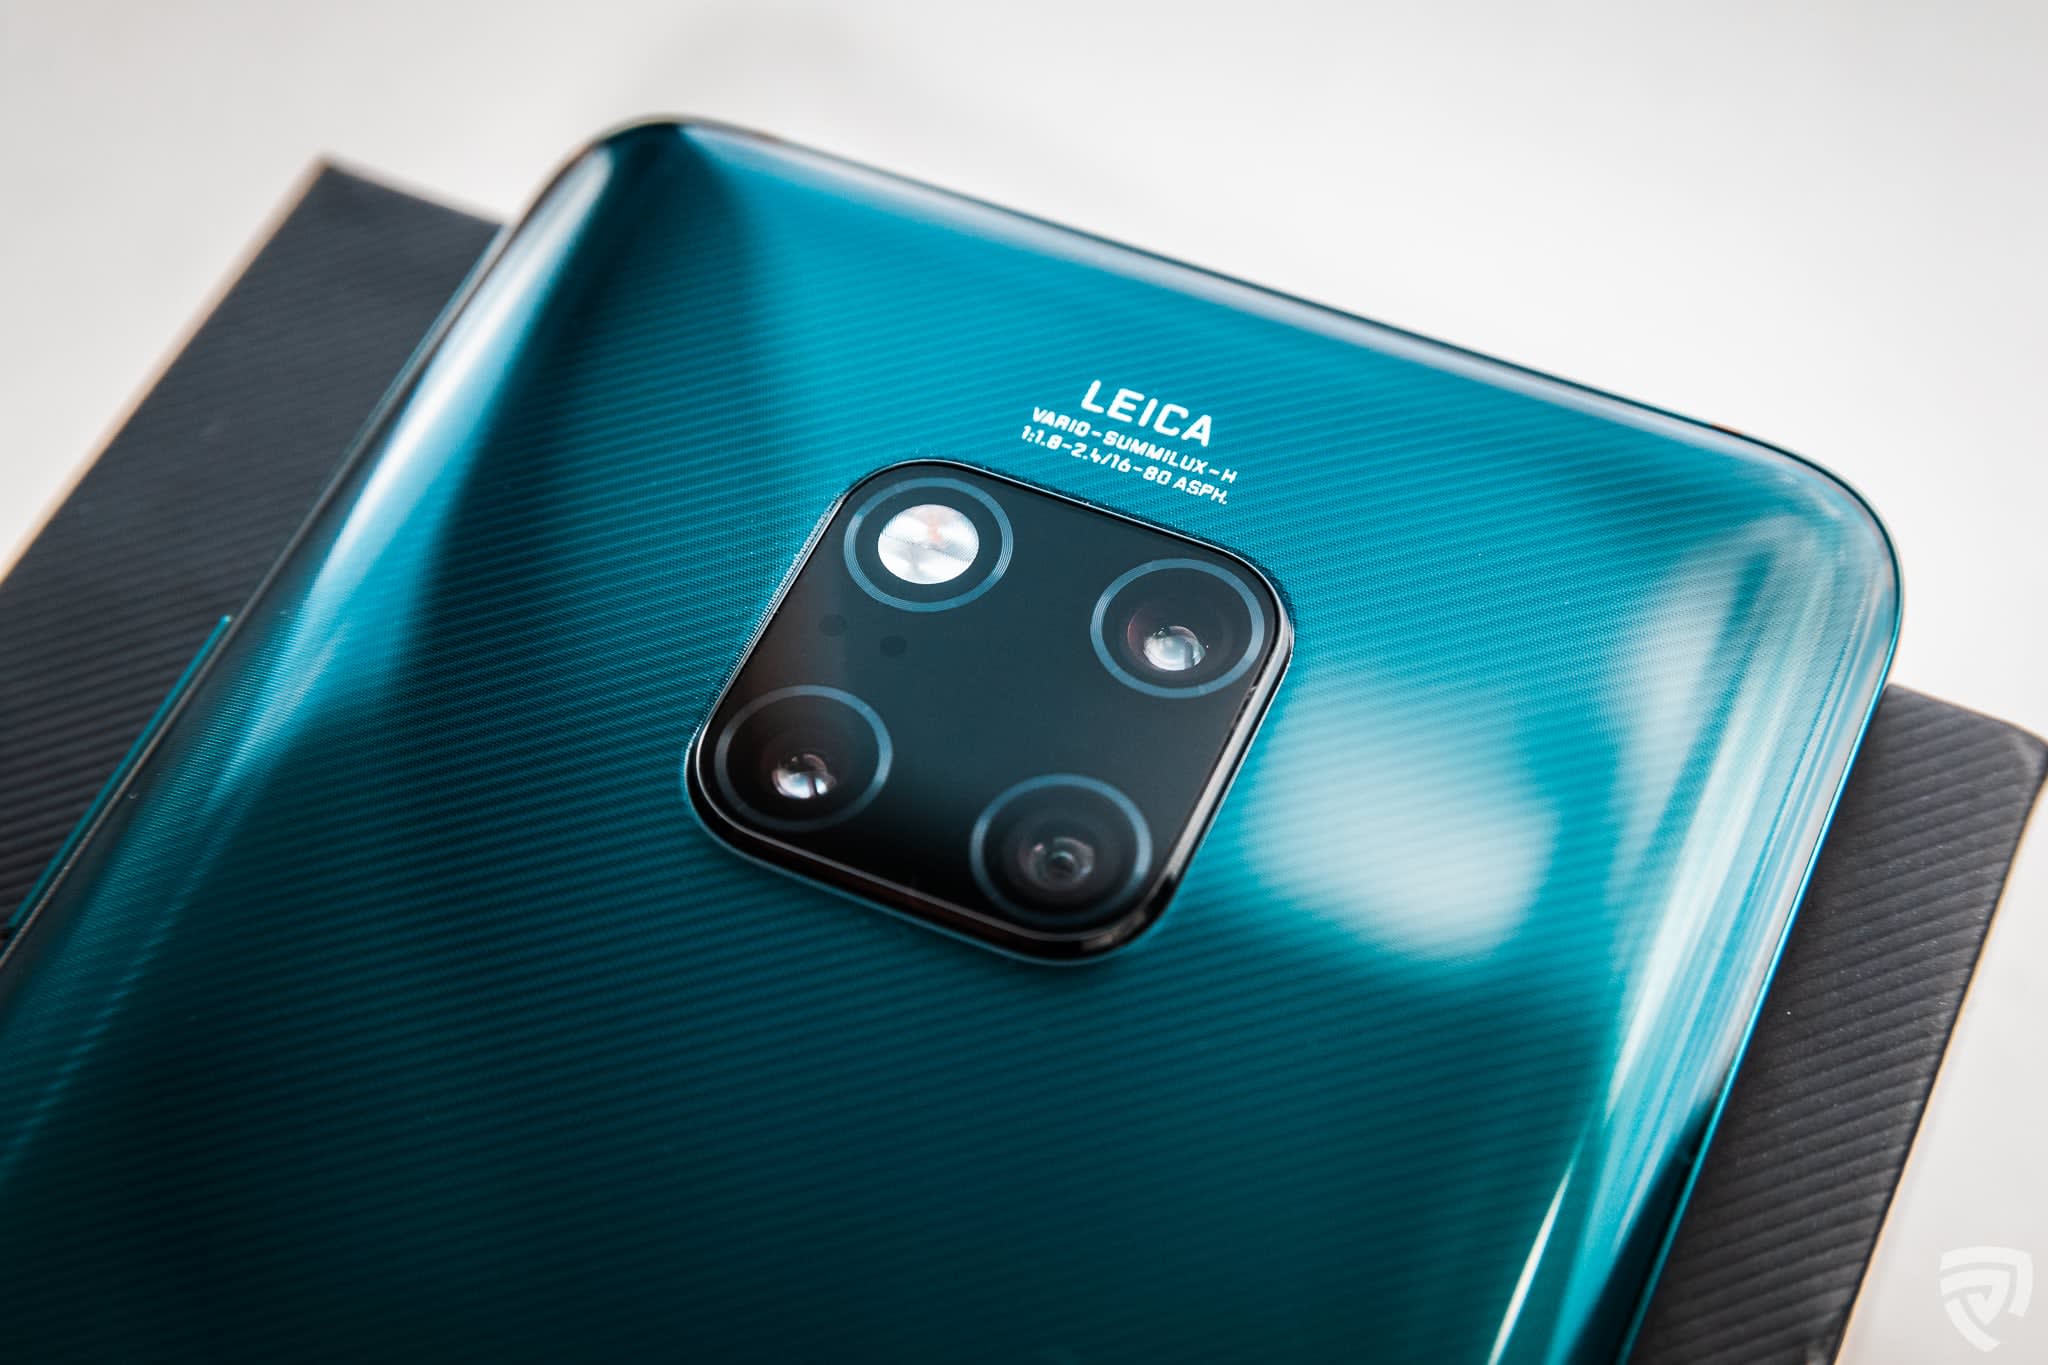 Huawei Mate 20 Pro Review in Malaysia 2020 - Price & Specs